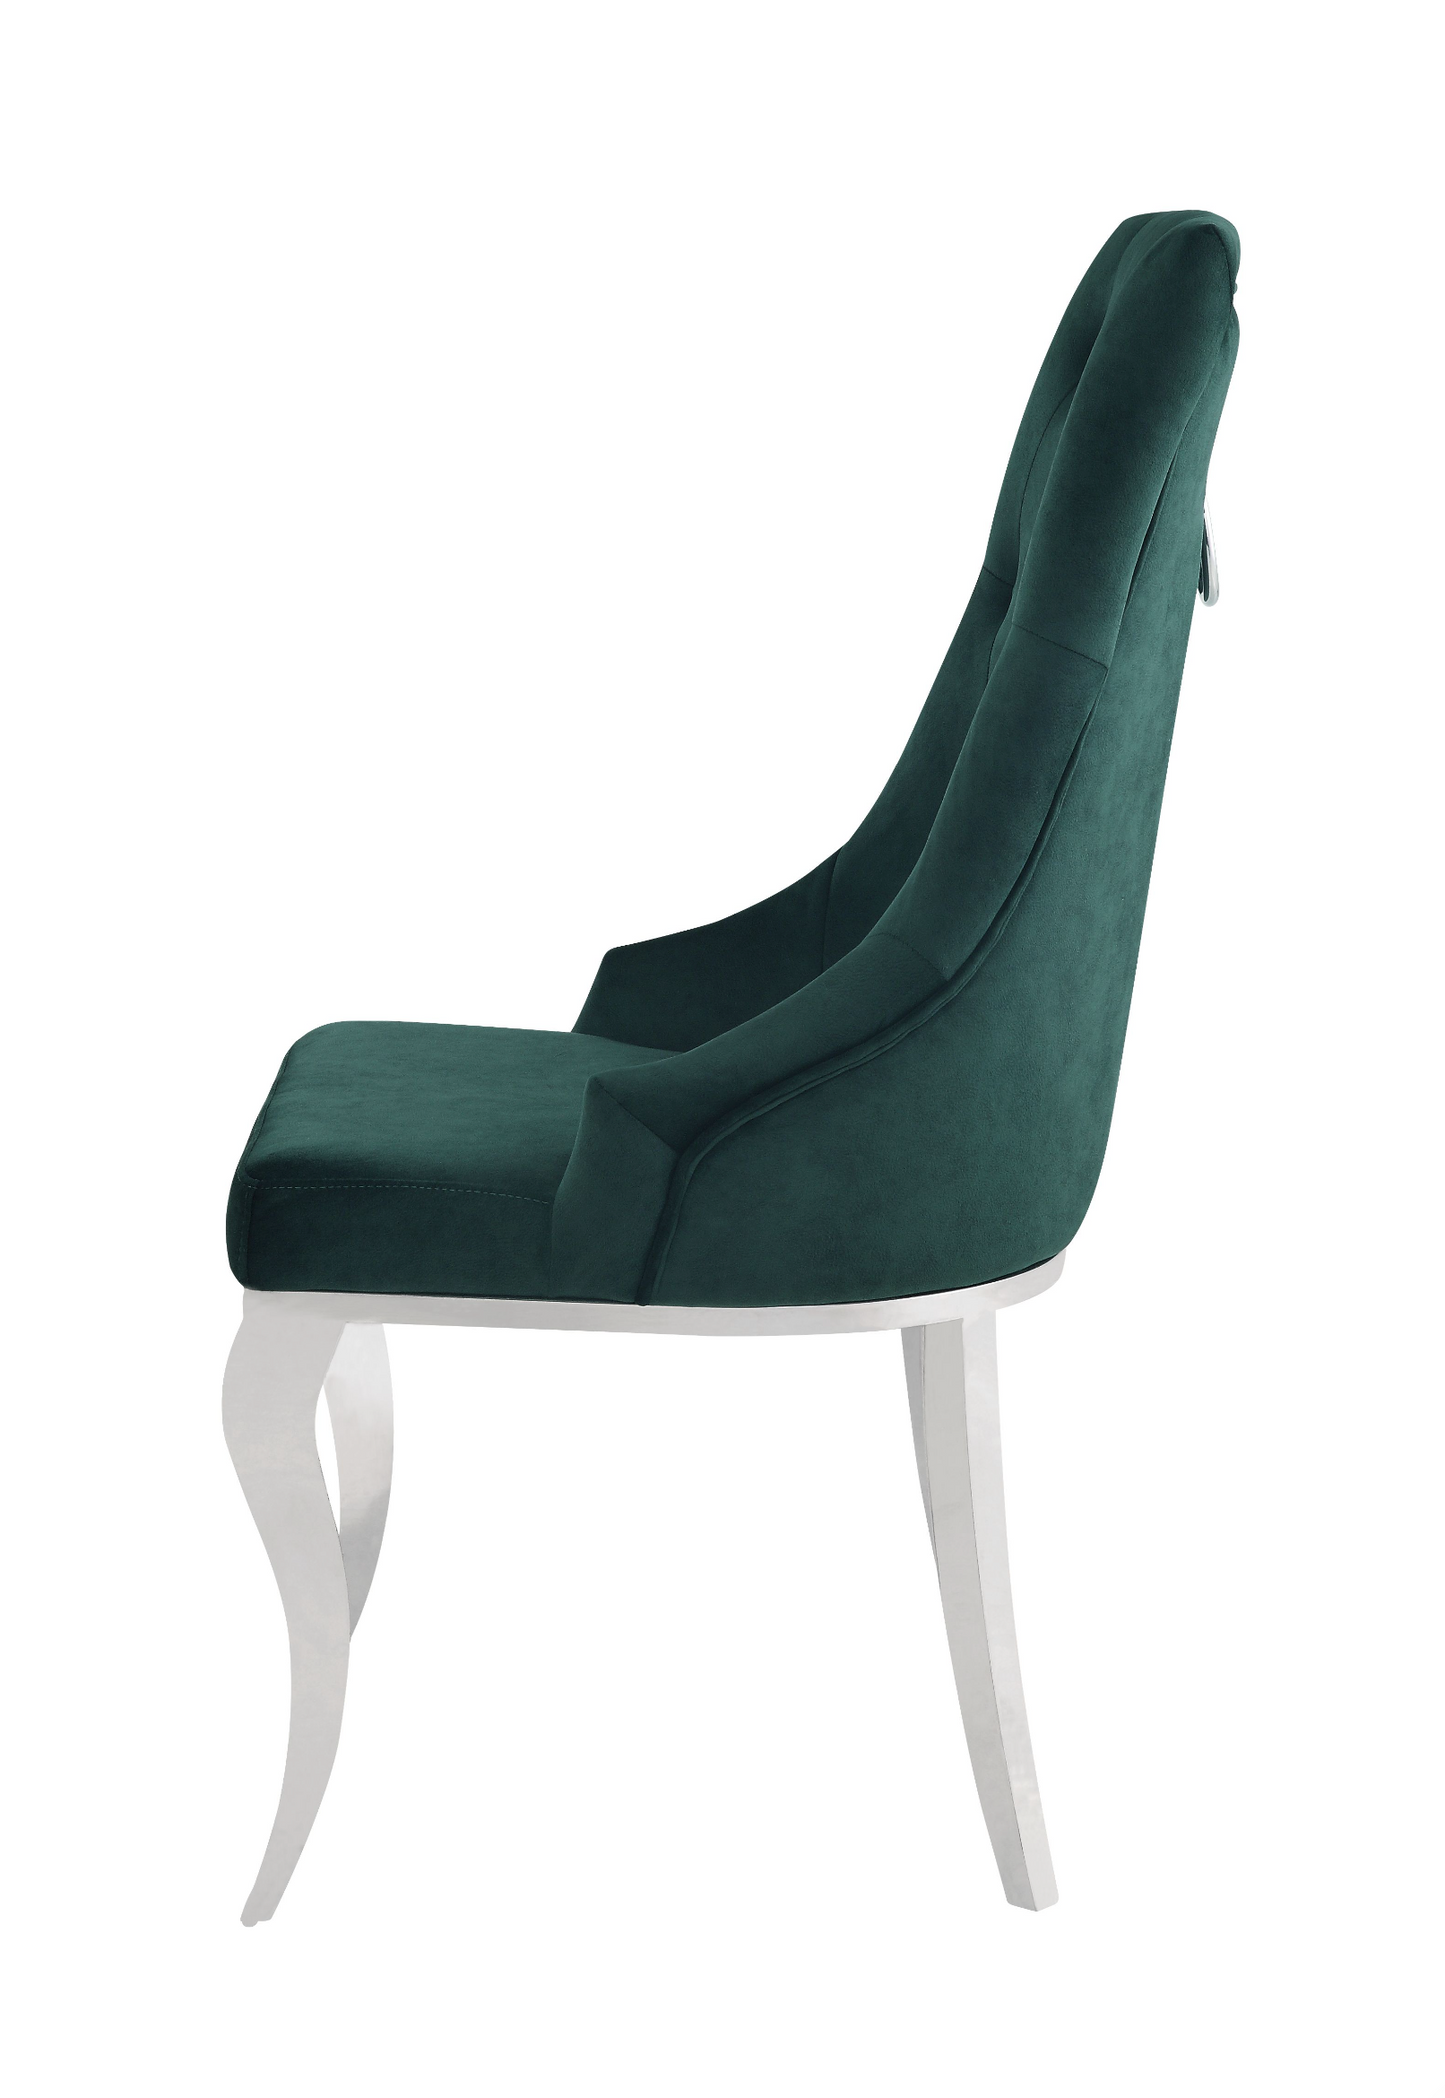 Green Fabric & Stainless Steel Dekel Dining Chairs (2 Set)